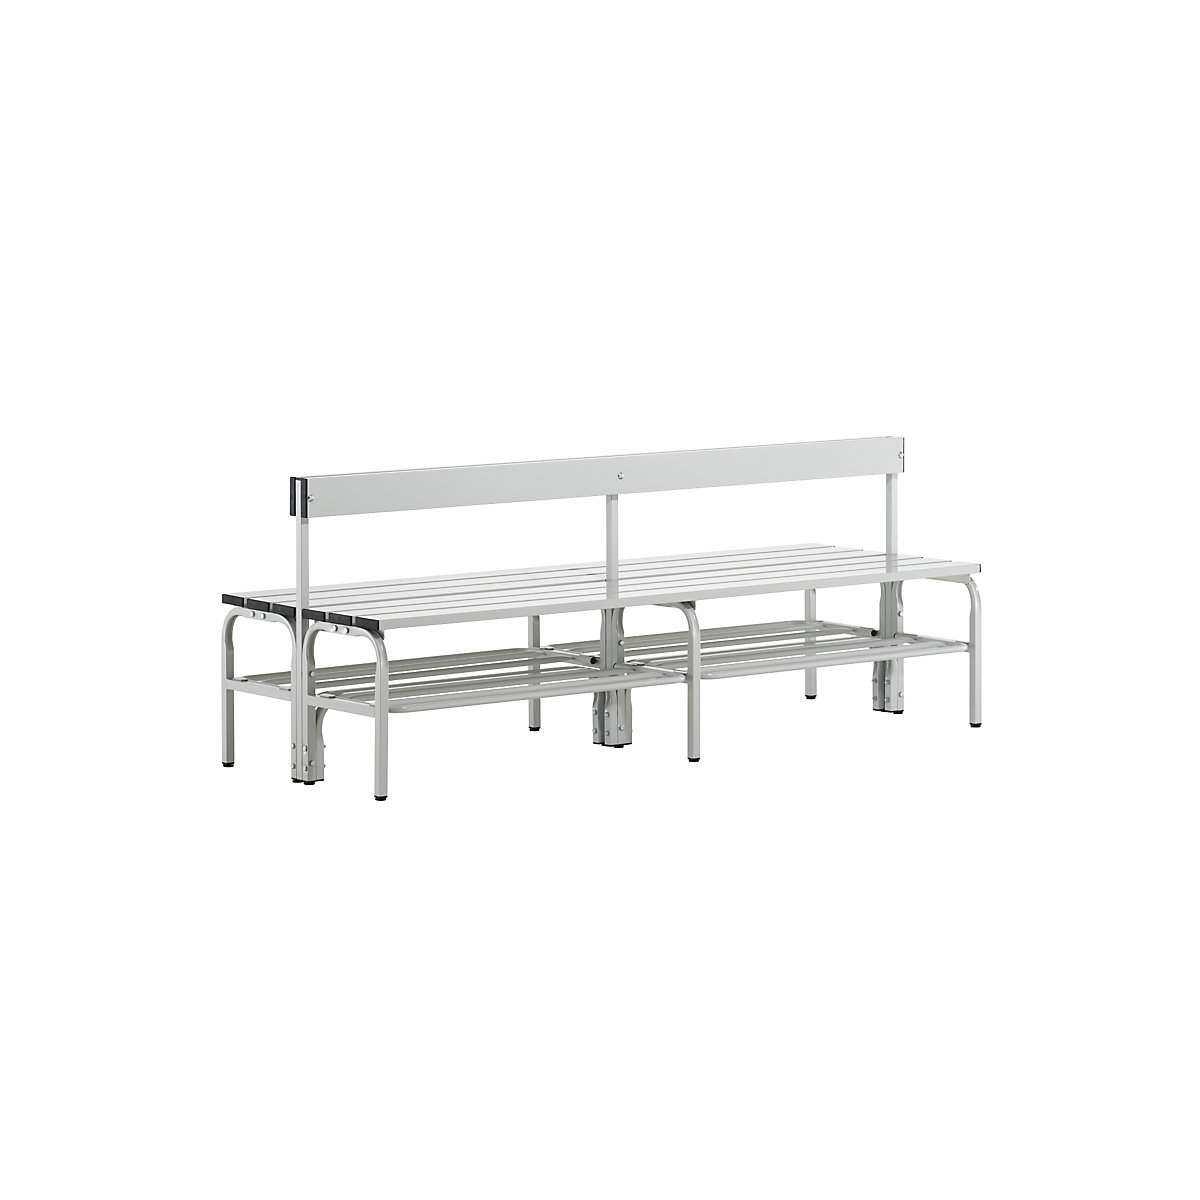 Half height cloakroom bench with back rest, double sided – Sypro, aluminium, length 1500 mm, light grey, shoe rack